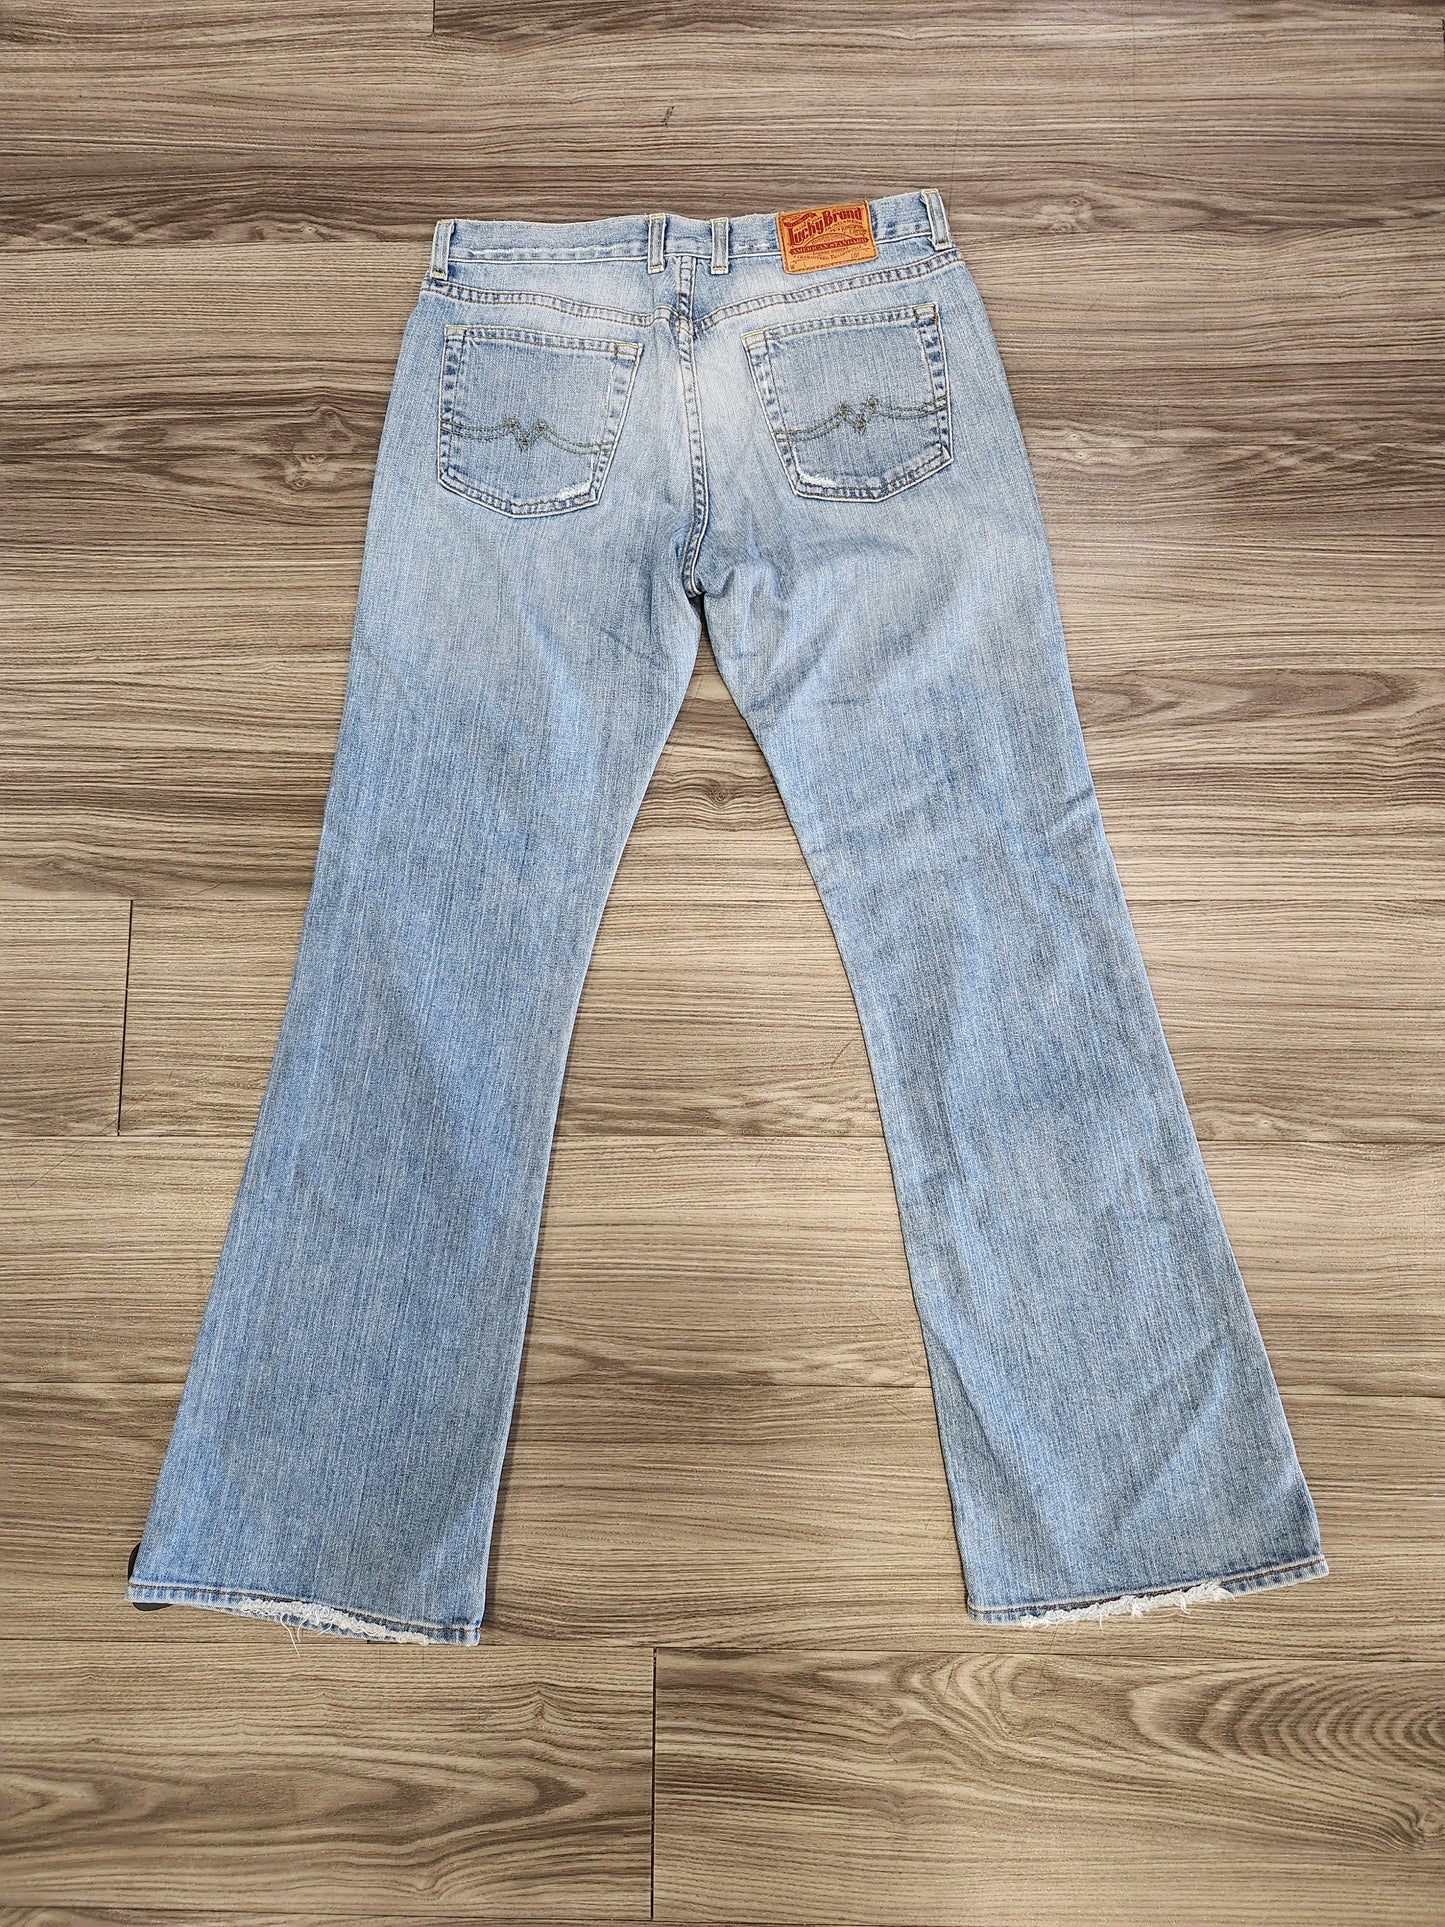 Jeans Boot Cut By Lucky Brand  Size: 10